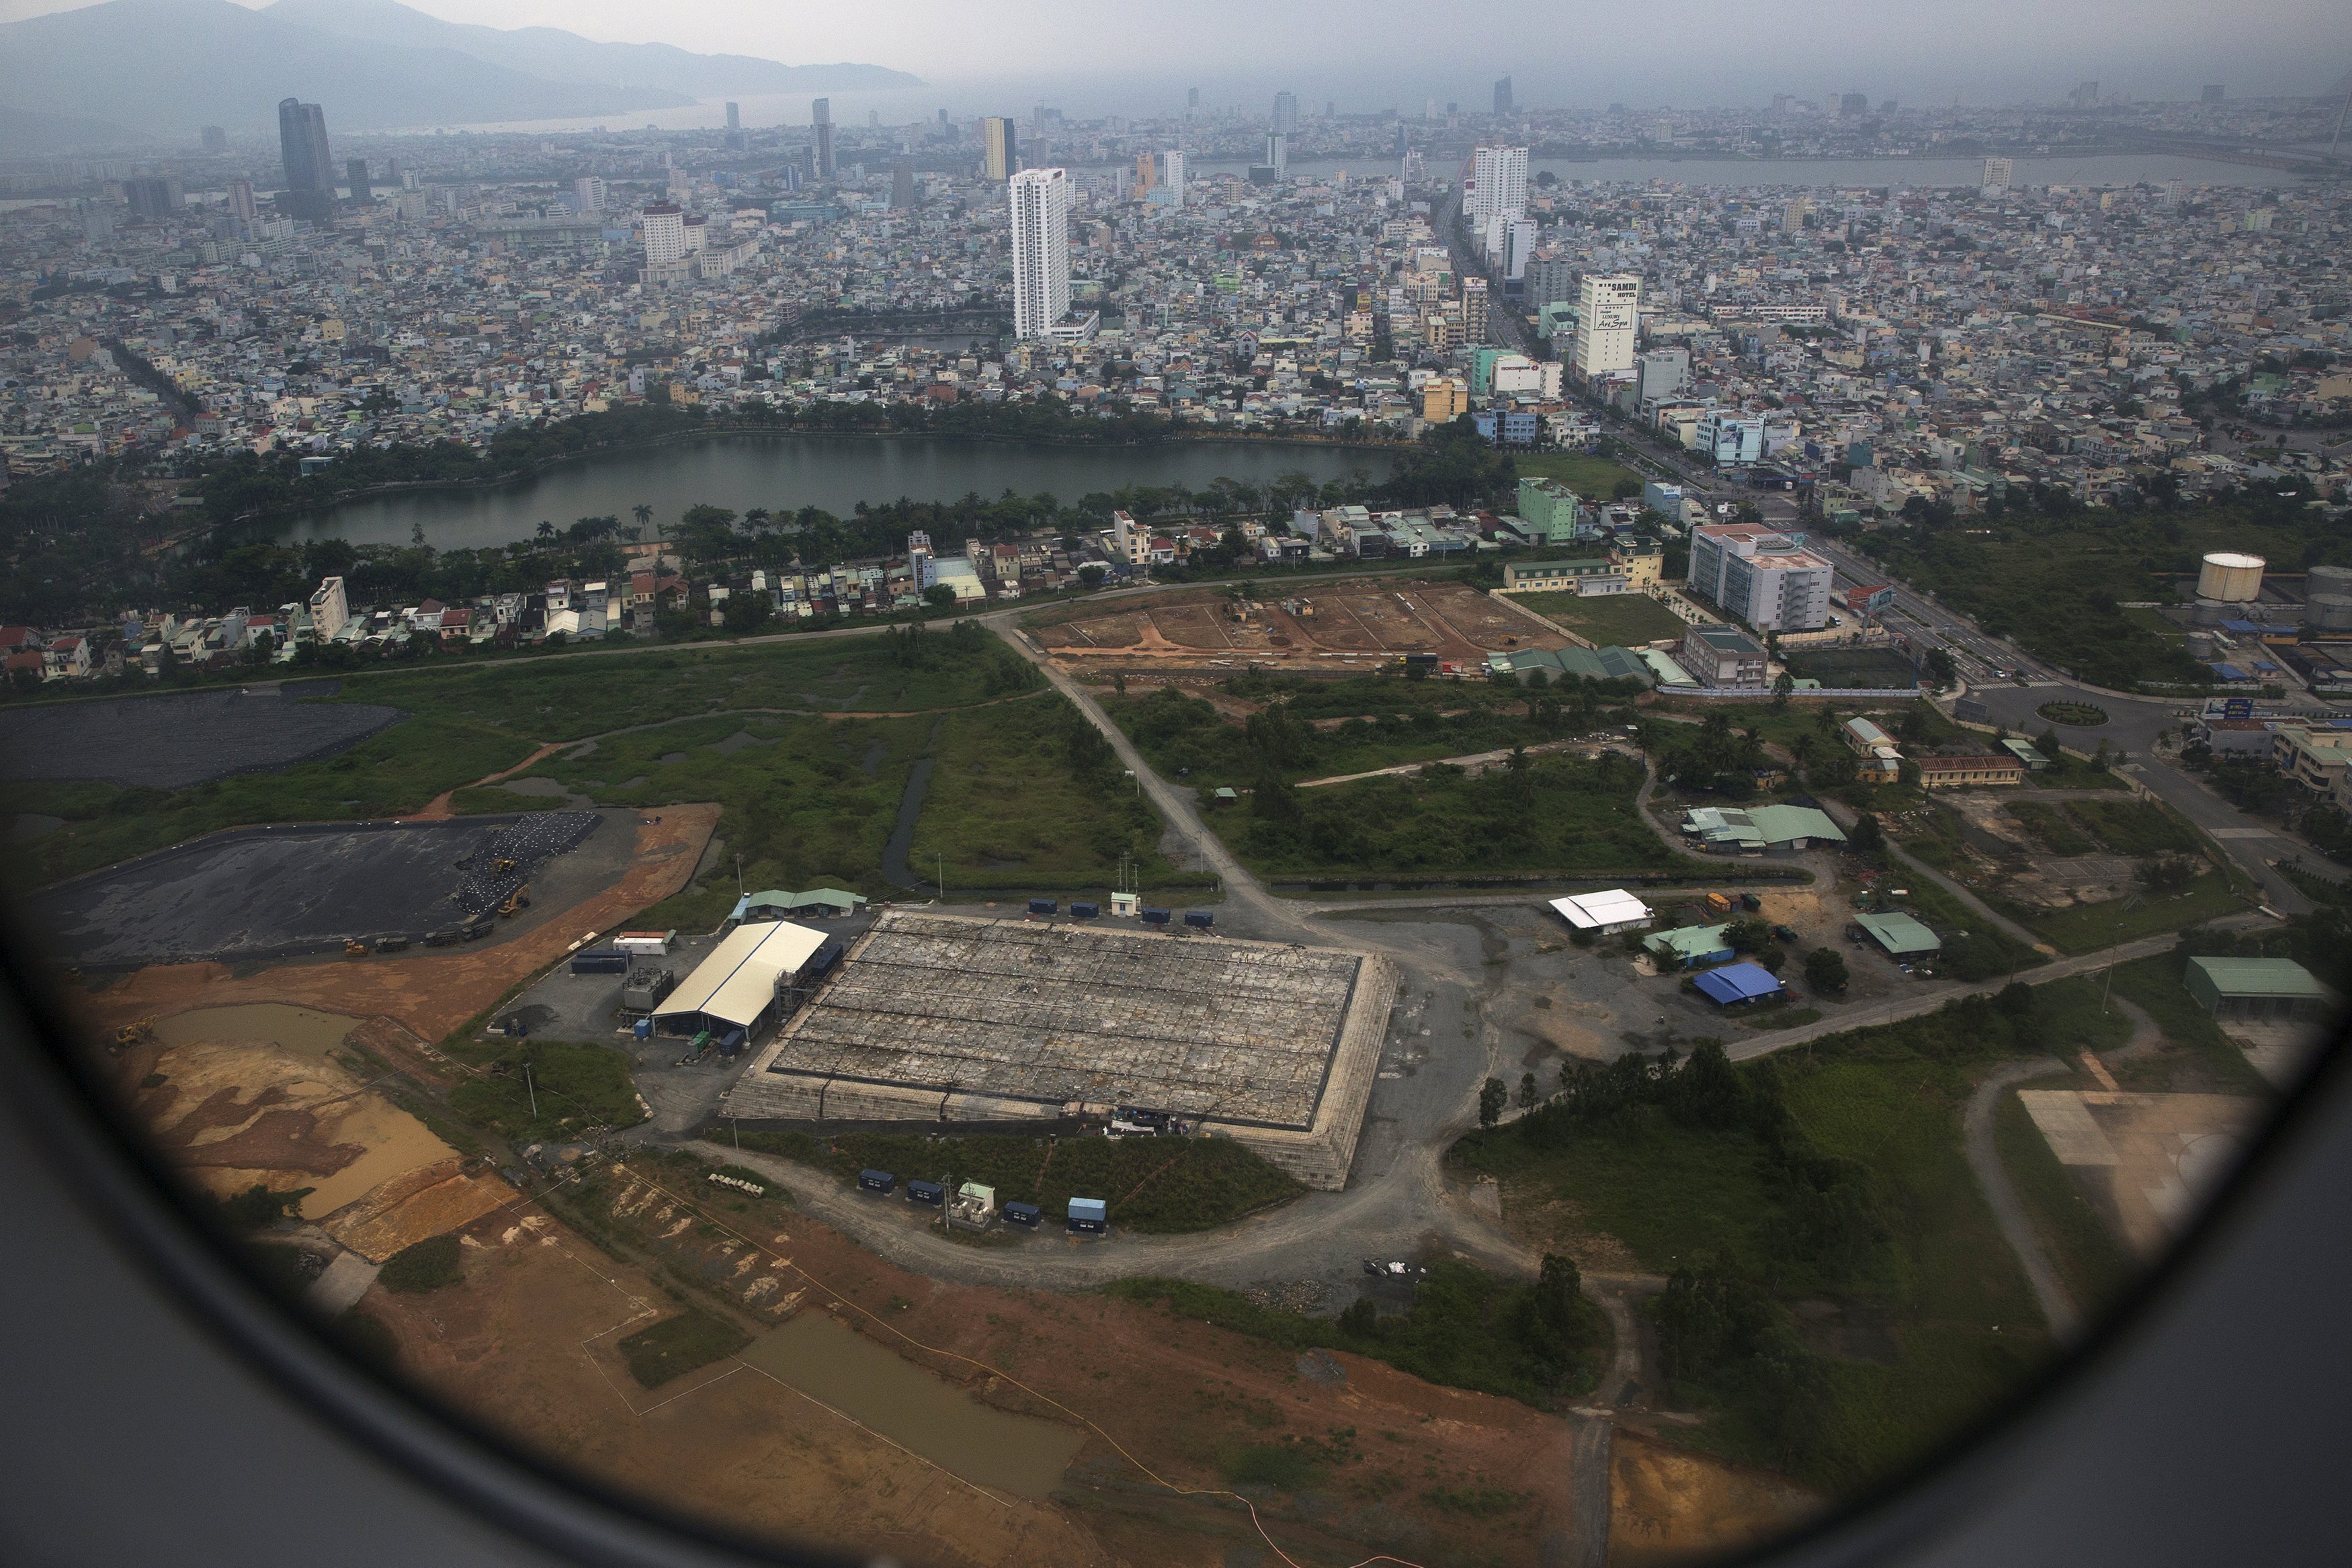 The cleaning operation of the area that was used for storing Agent Orange is seen from a plane taking off from Danang international airport April 13, 2015. Agent Orange was stored at Danang airbase and sprayed from U.S. warplanes to expose Vietnamese troops from the North and destroy their supplies, in jungles along the border with Laos. Since 2012, both the U.S. and Vietnam have been conducting a clean-up operation at the site.